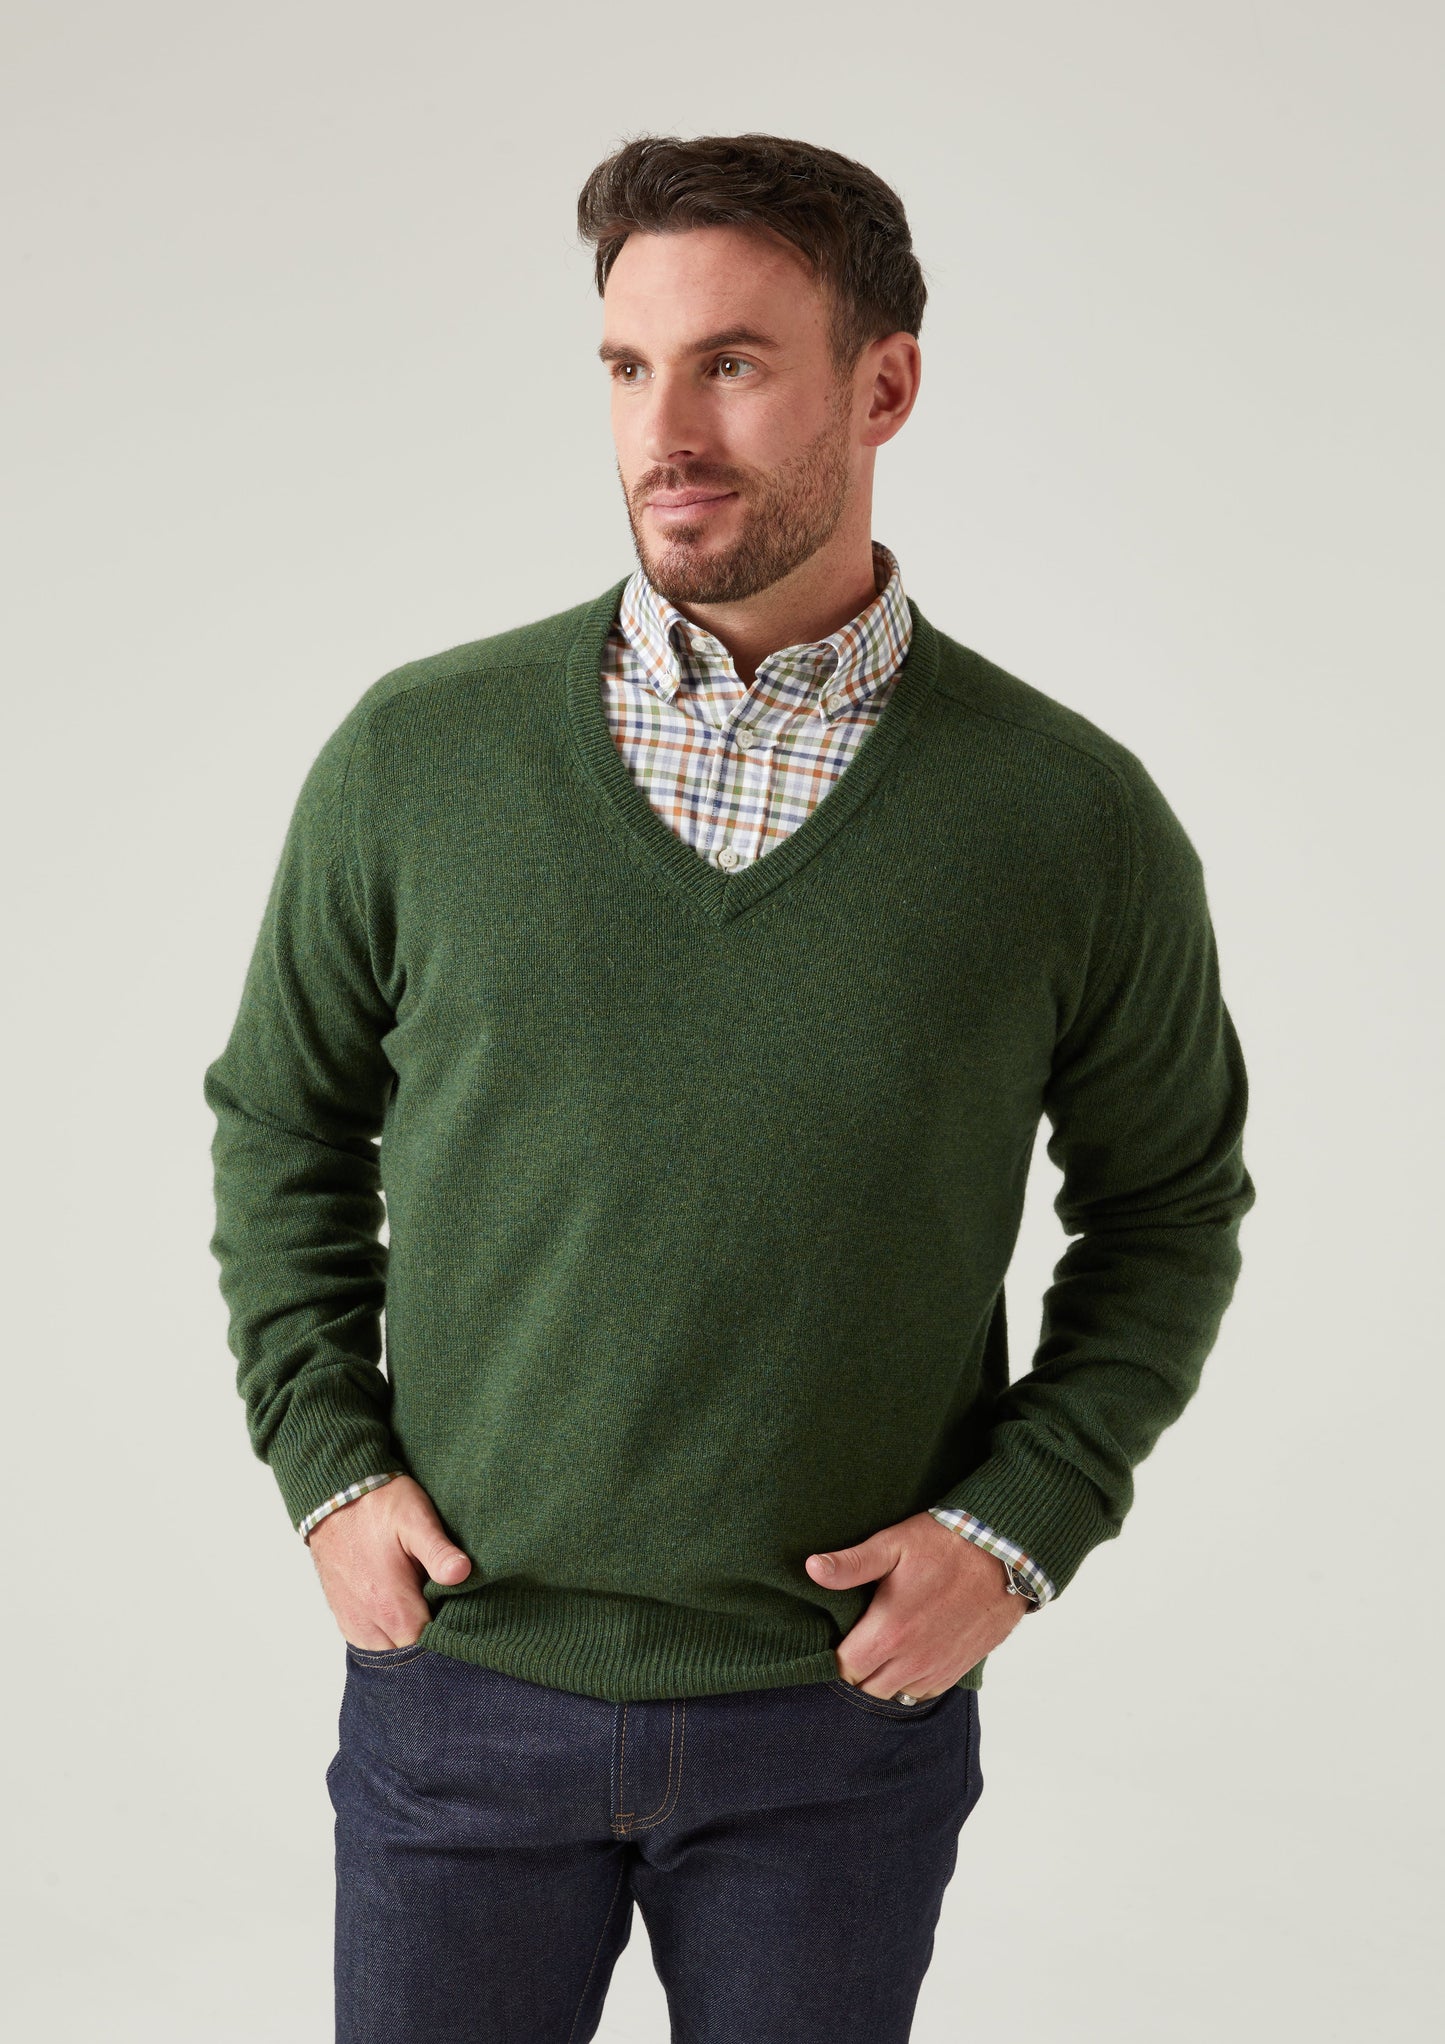 Hampshire Lambswool Jumper in Rosemary